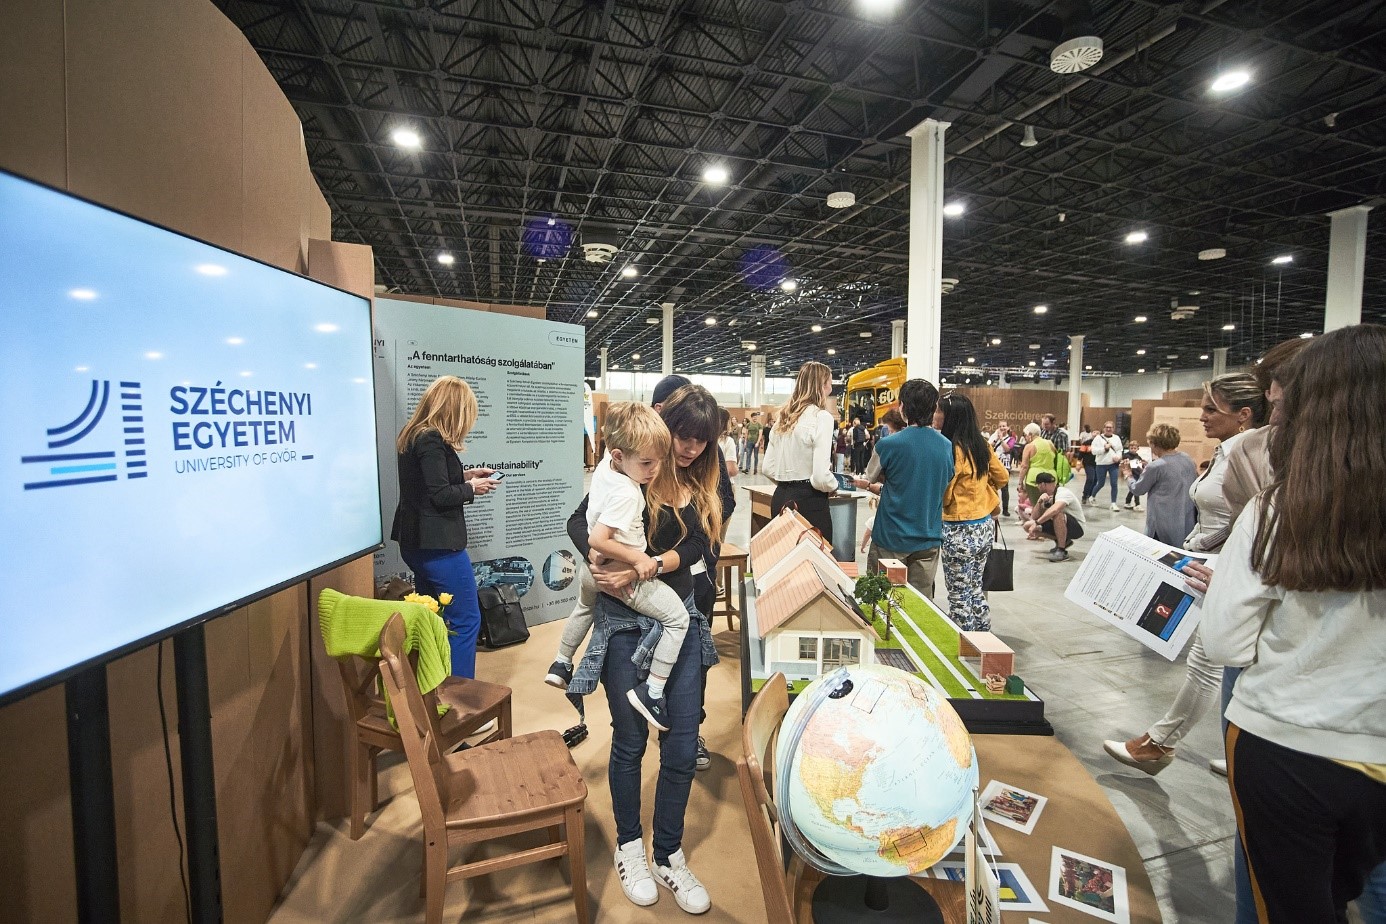 The University’s booth gained huge popularity among the visitors at the Planet Budapest (Photo: József Bankó/ Paradignow Photography)